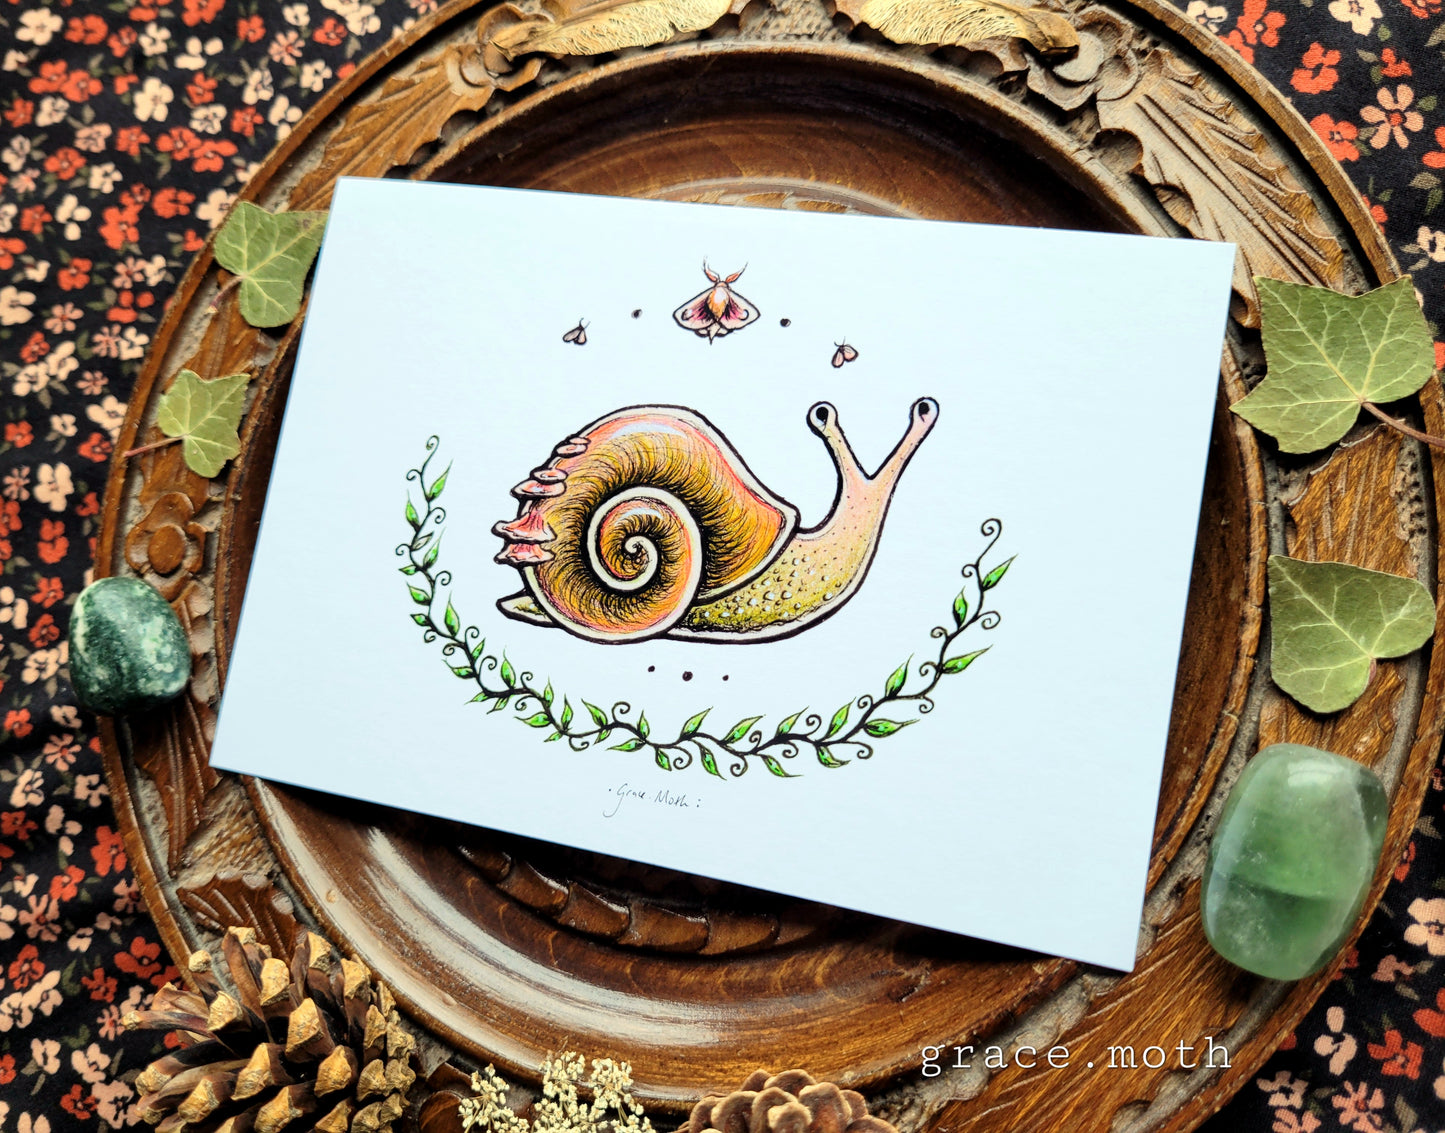 Cute Snail - A6 print by Grace Moth - 5.8 x 4.1 - Cottagecore - Gothic - Witchy